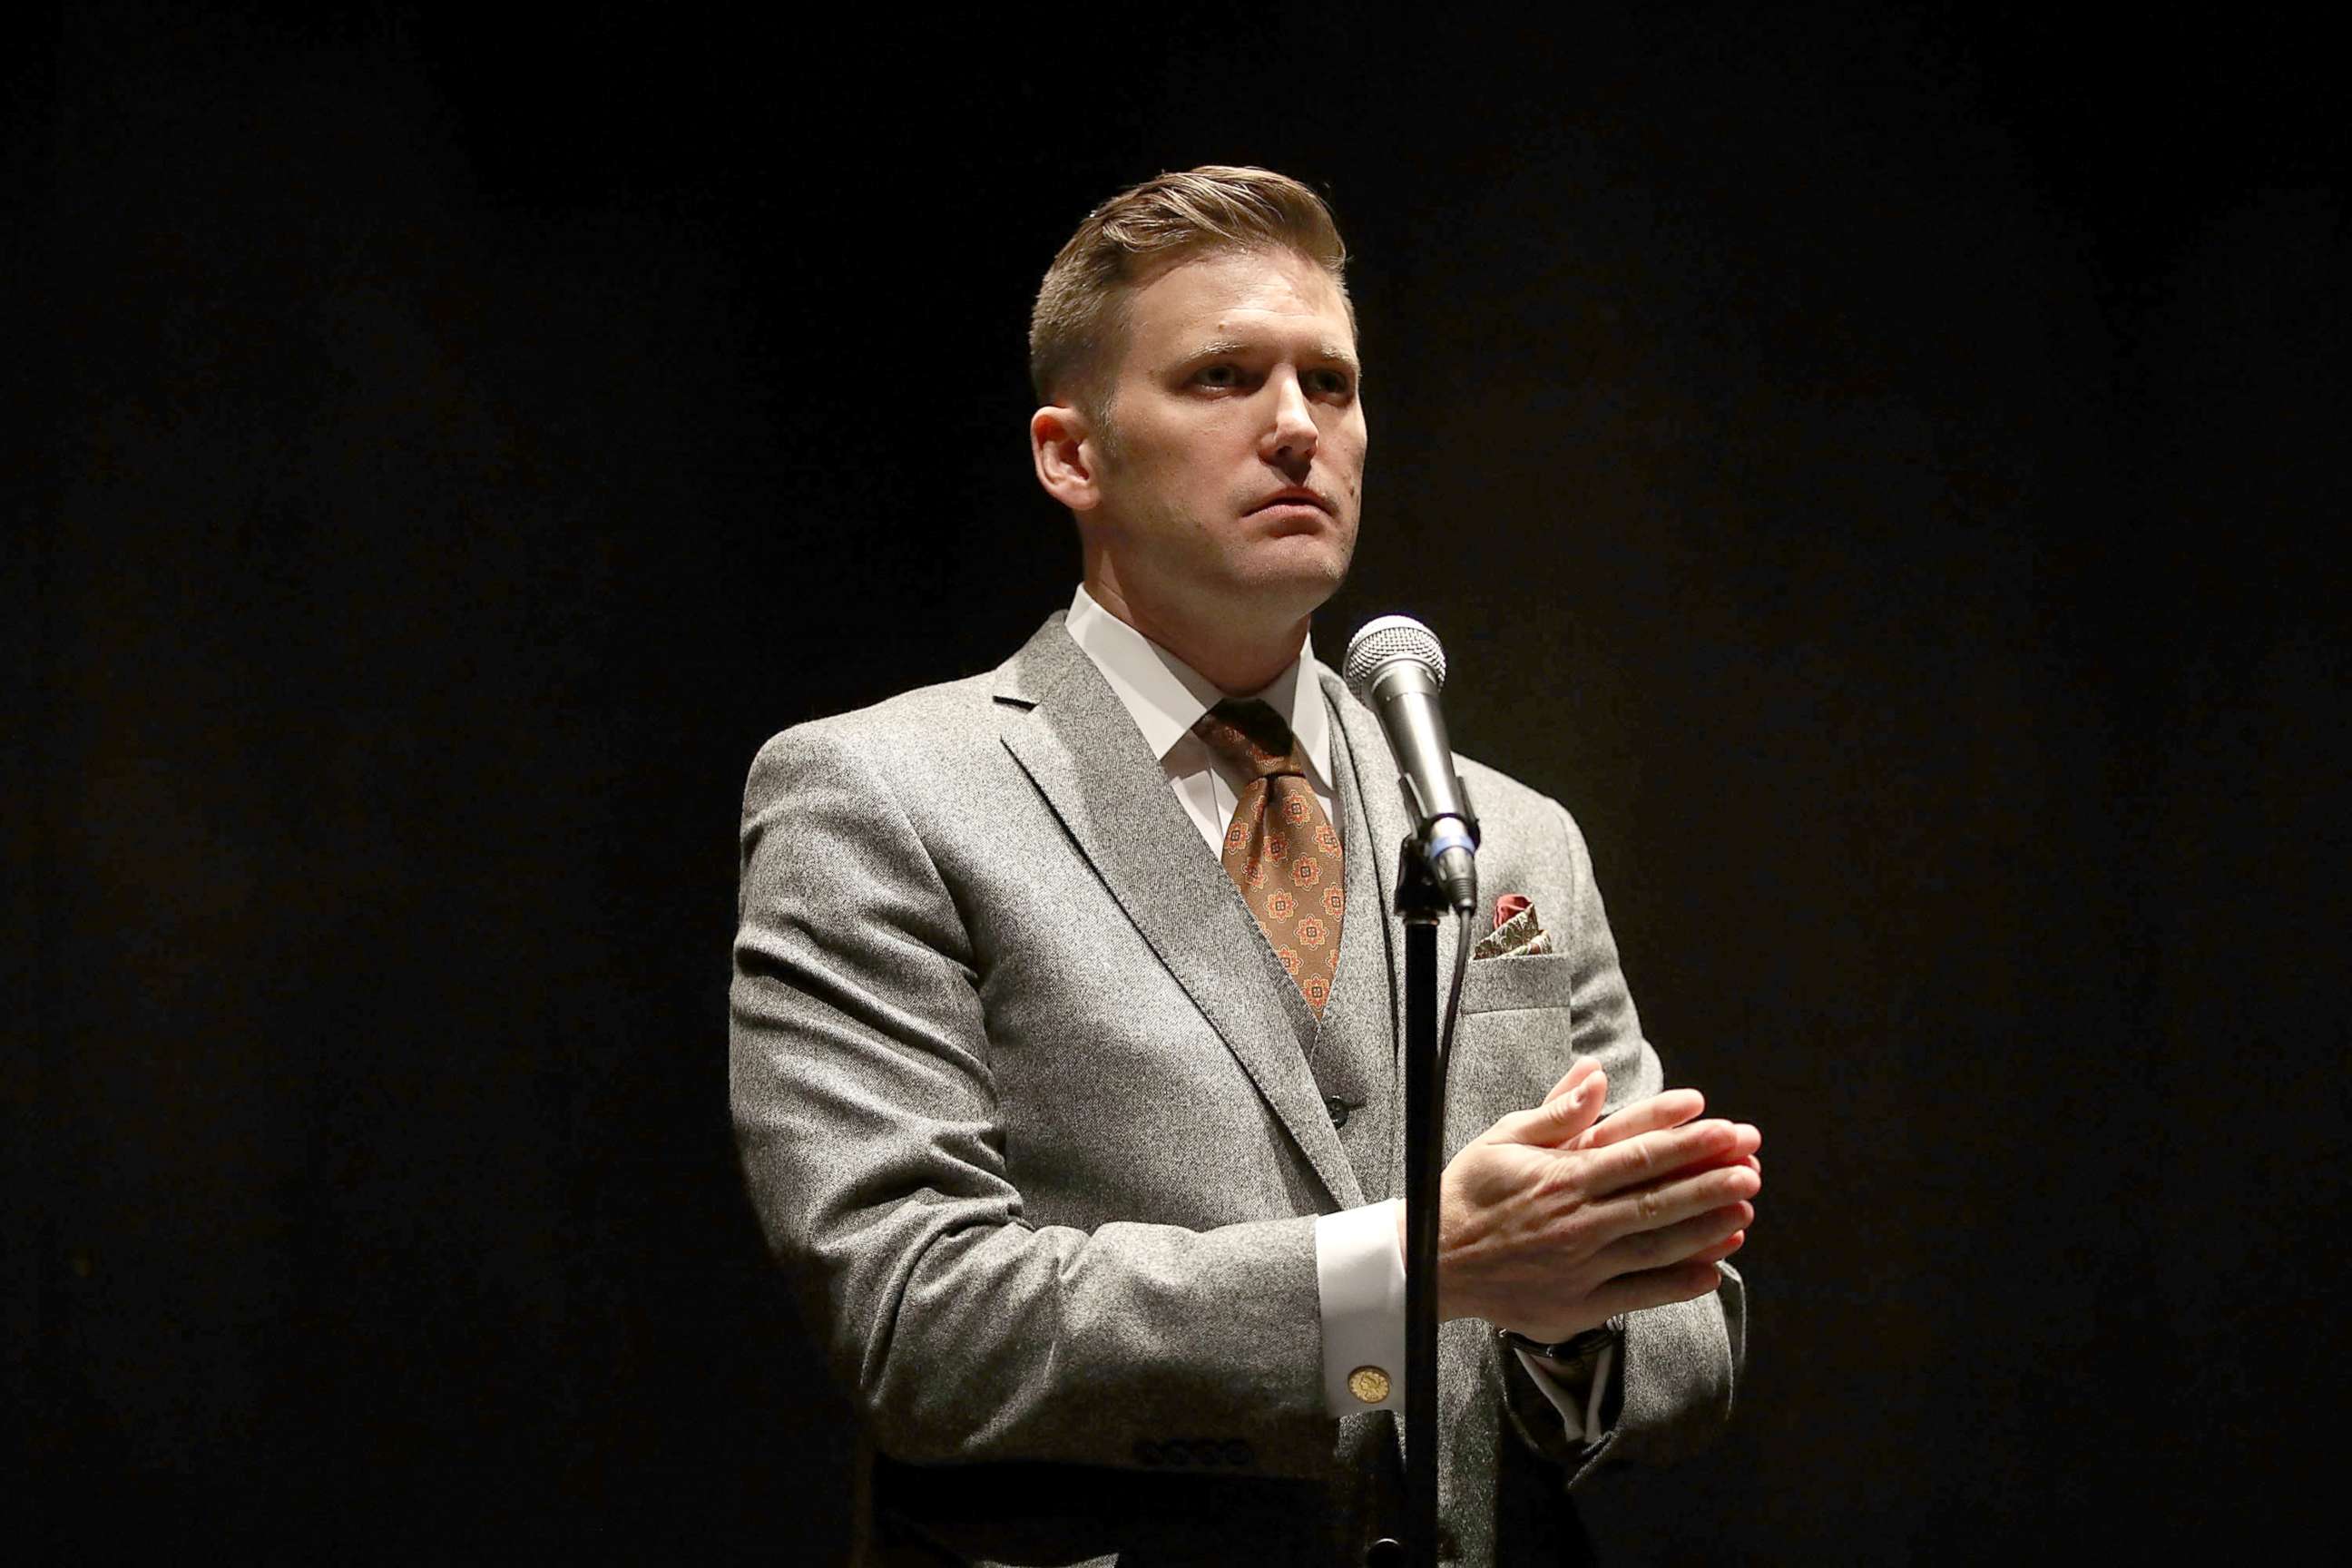 PHOTO: White nationalist Richard Spencer, who popularized the term "alt-right" speaks during a press conference at the Curtis M. Phillips Center for the Performing Arts, Oct. 19, 2017, in Gainesville, Fla.